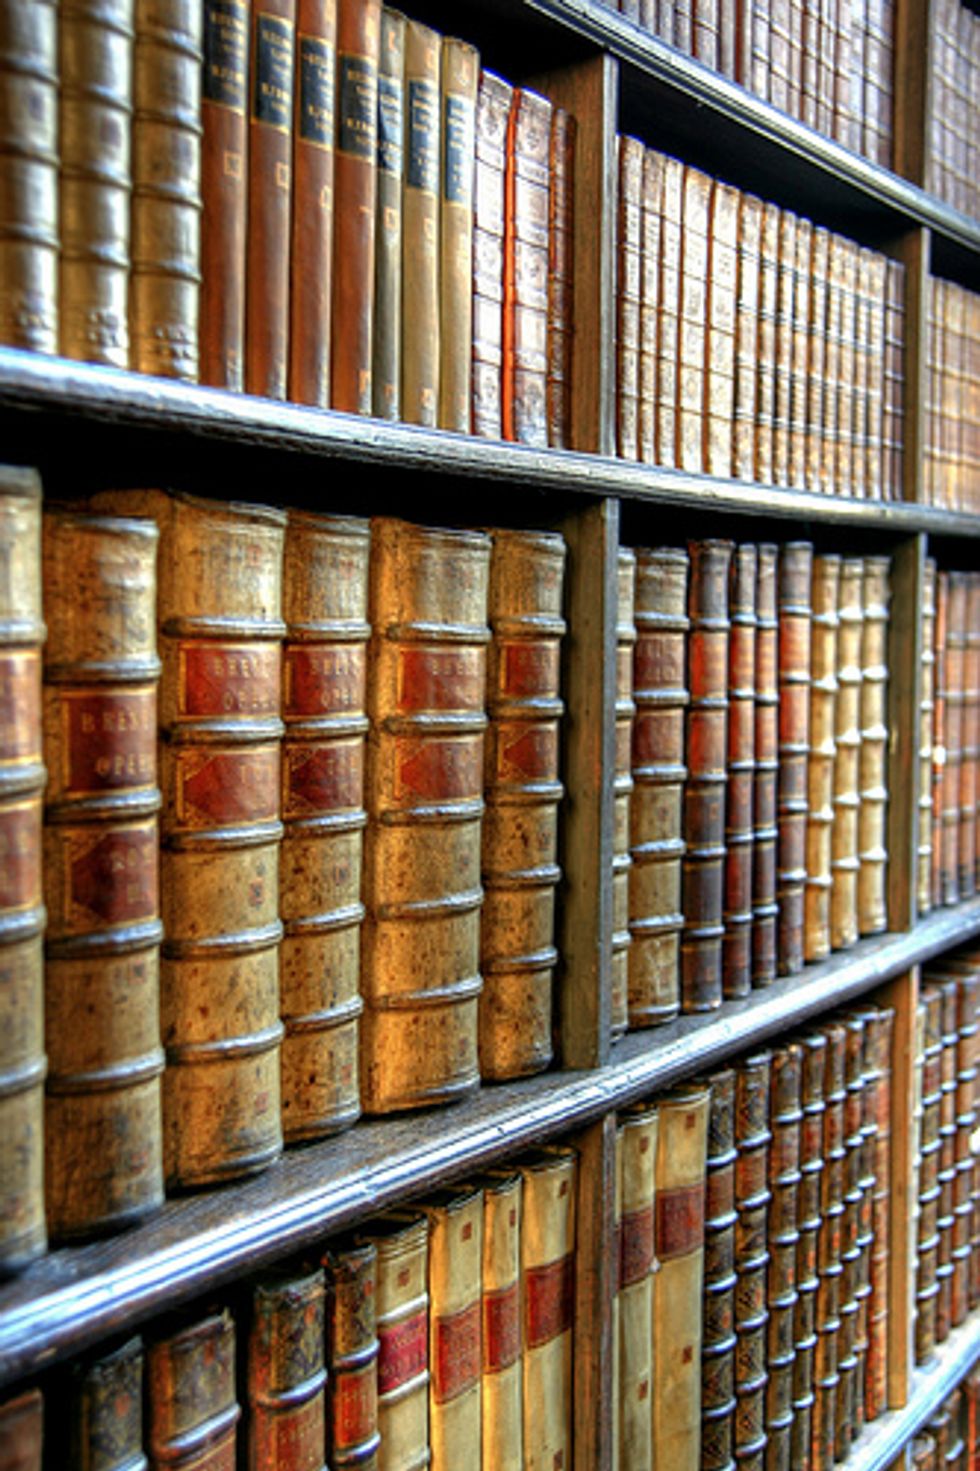 Google Books Ruling Leaves Fate of Founder's Dream of  "Library to Last Forever" in Limbo